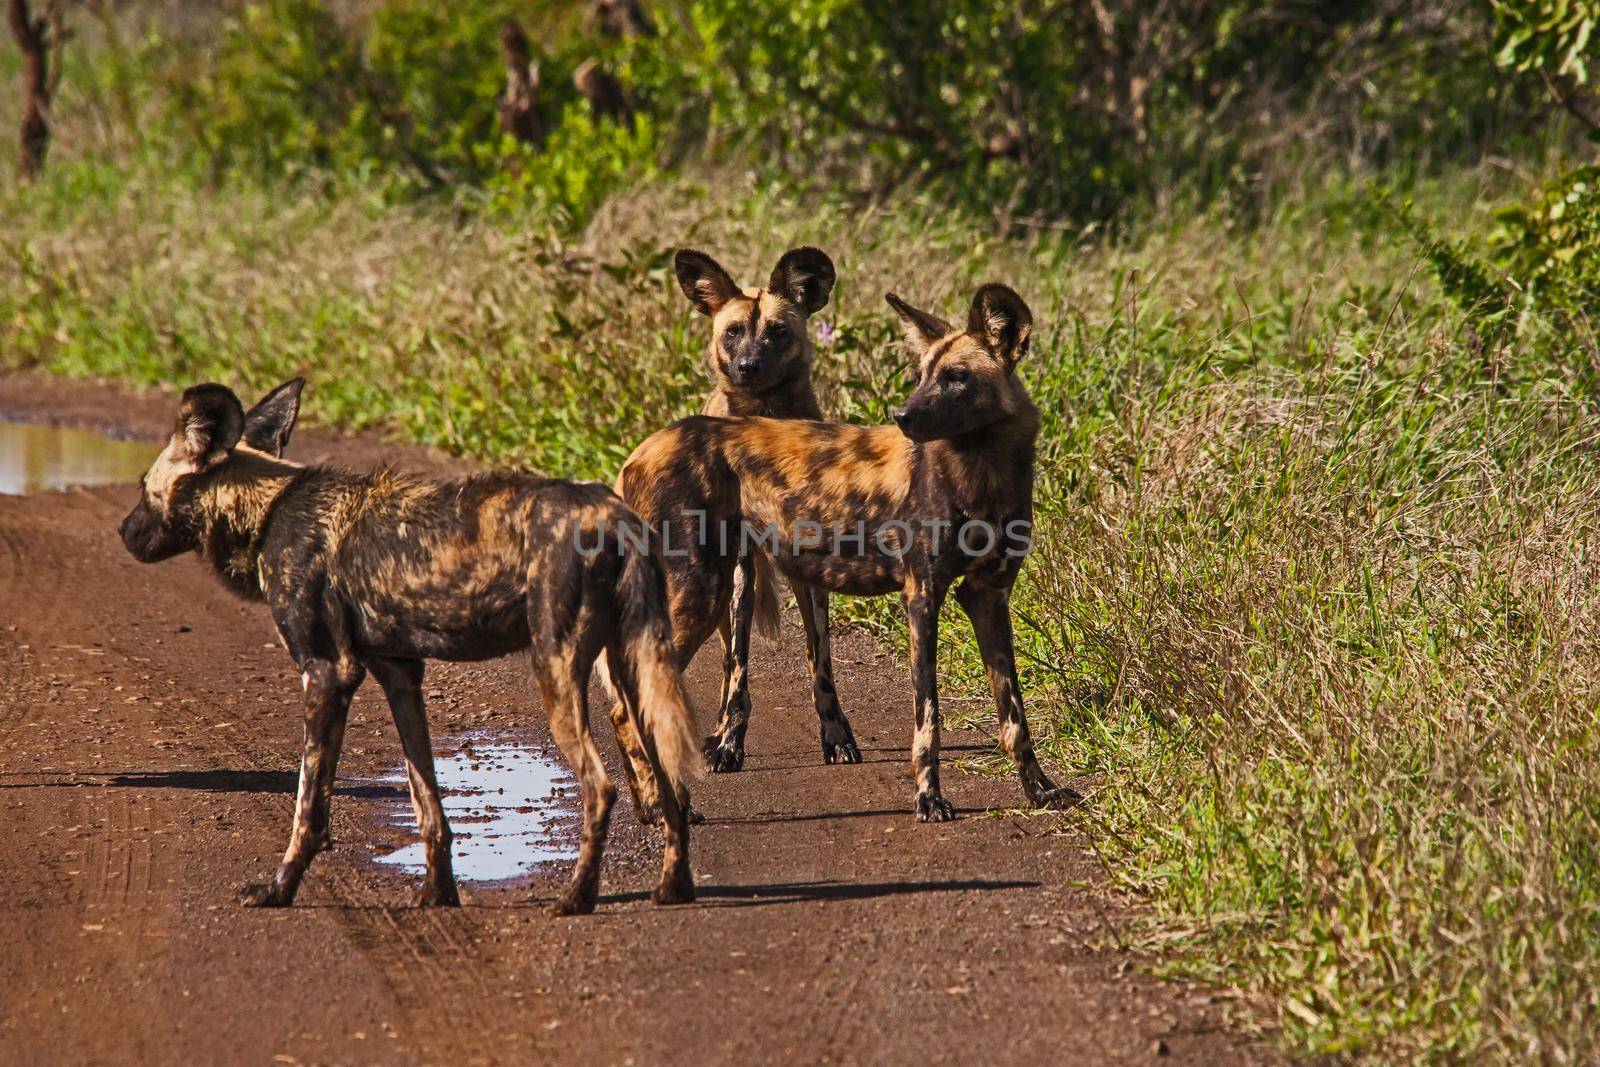 African Wild Dog (Lycaon pictus) 15256 by kobus_peche